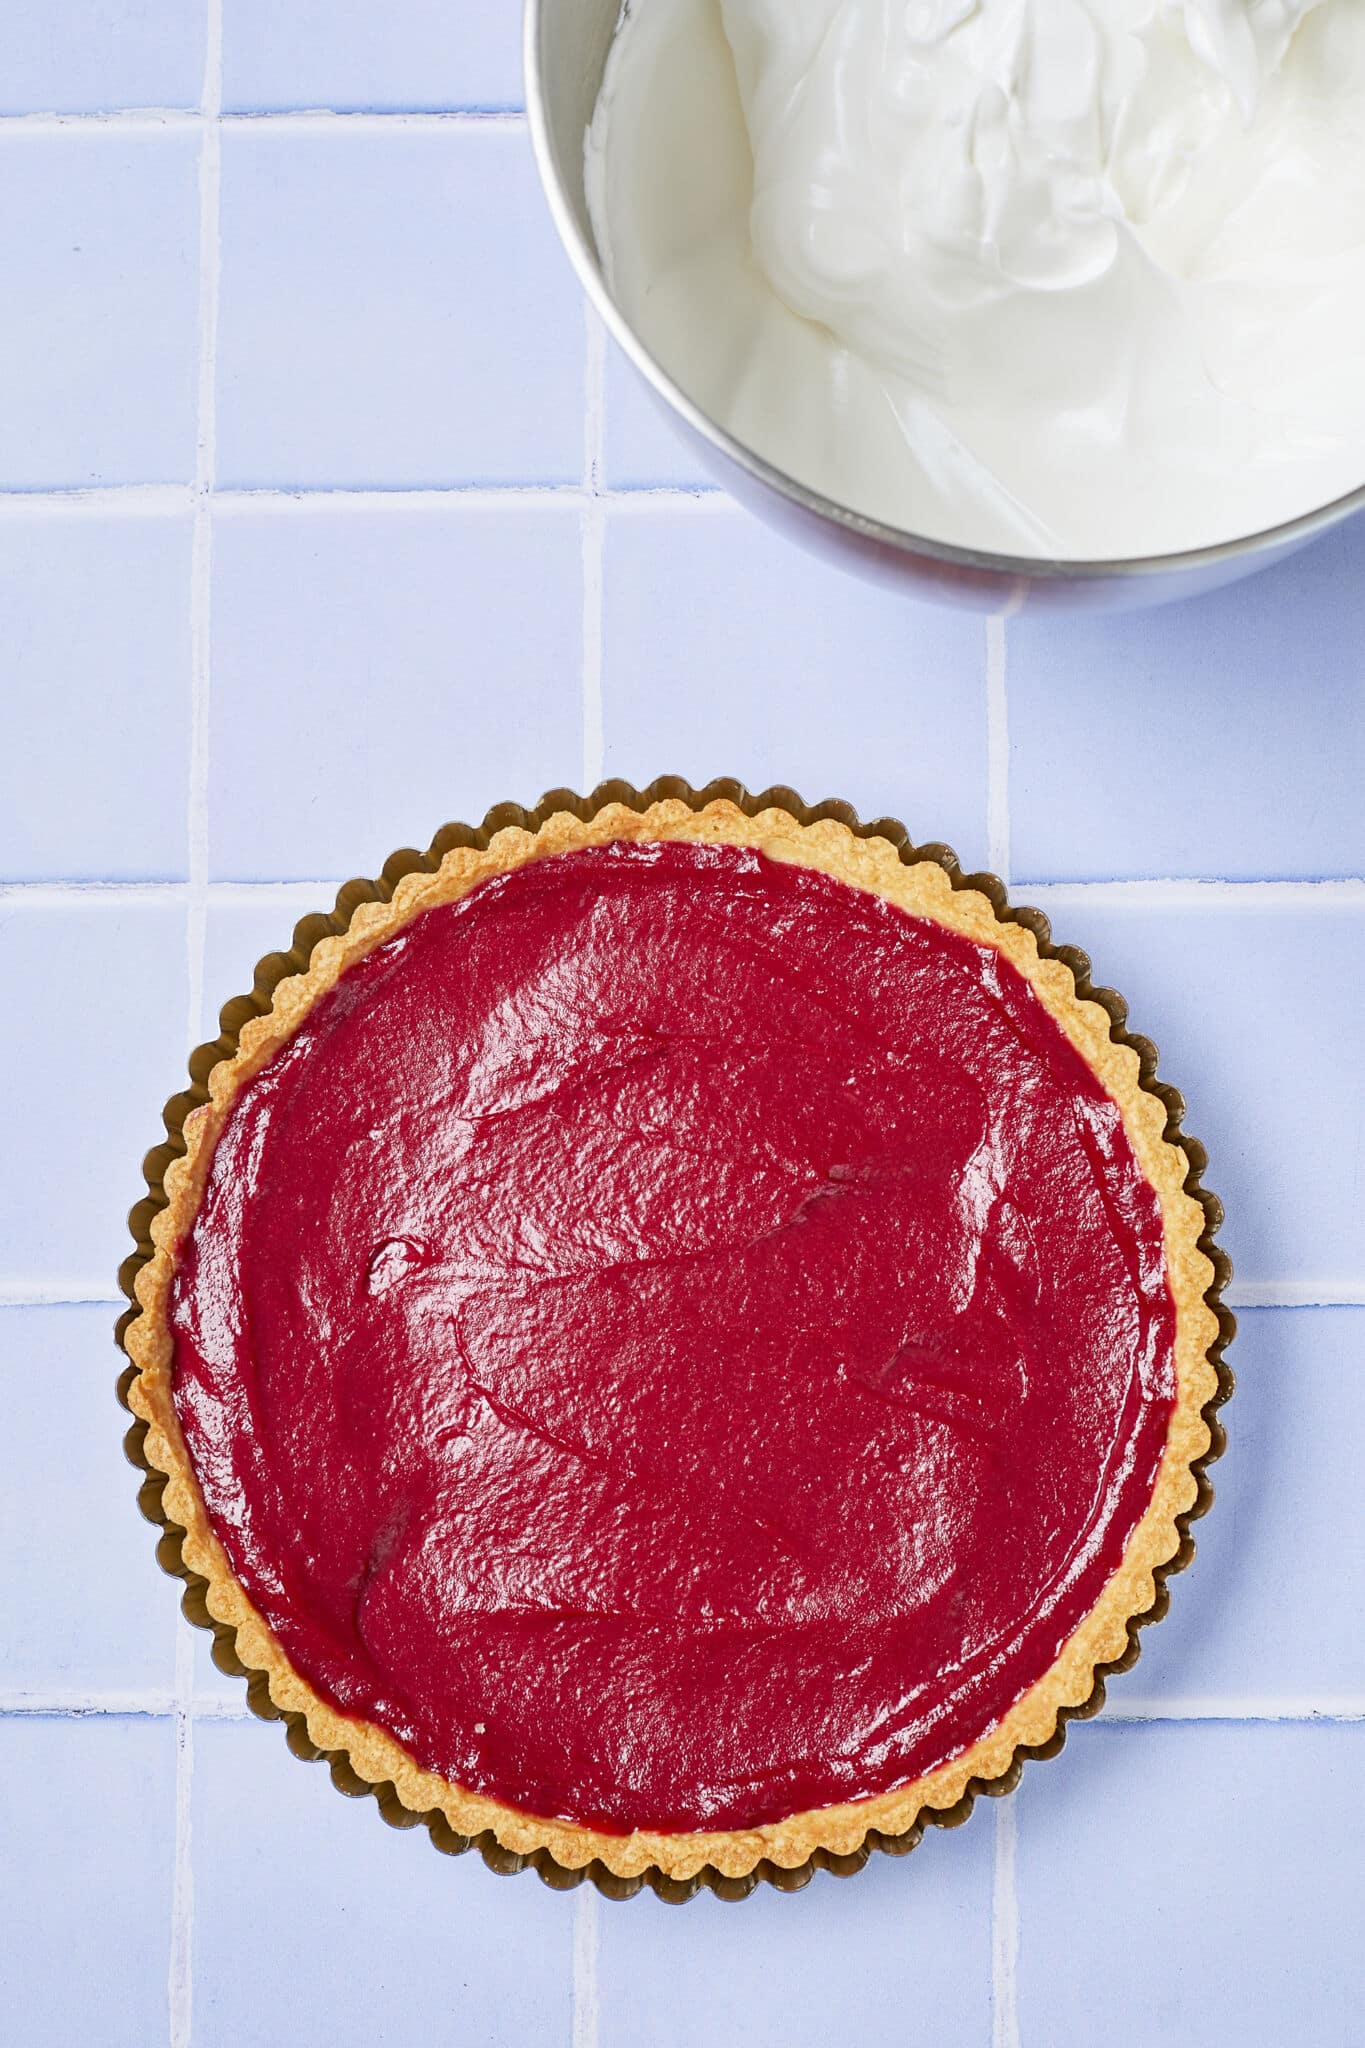 Step-by-step instruction: fill the baked curst with raspberry curd and bake again to bind them together better. A bowl of topping is ready on the side. 